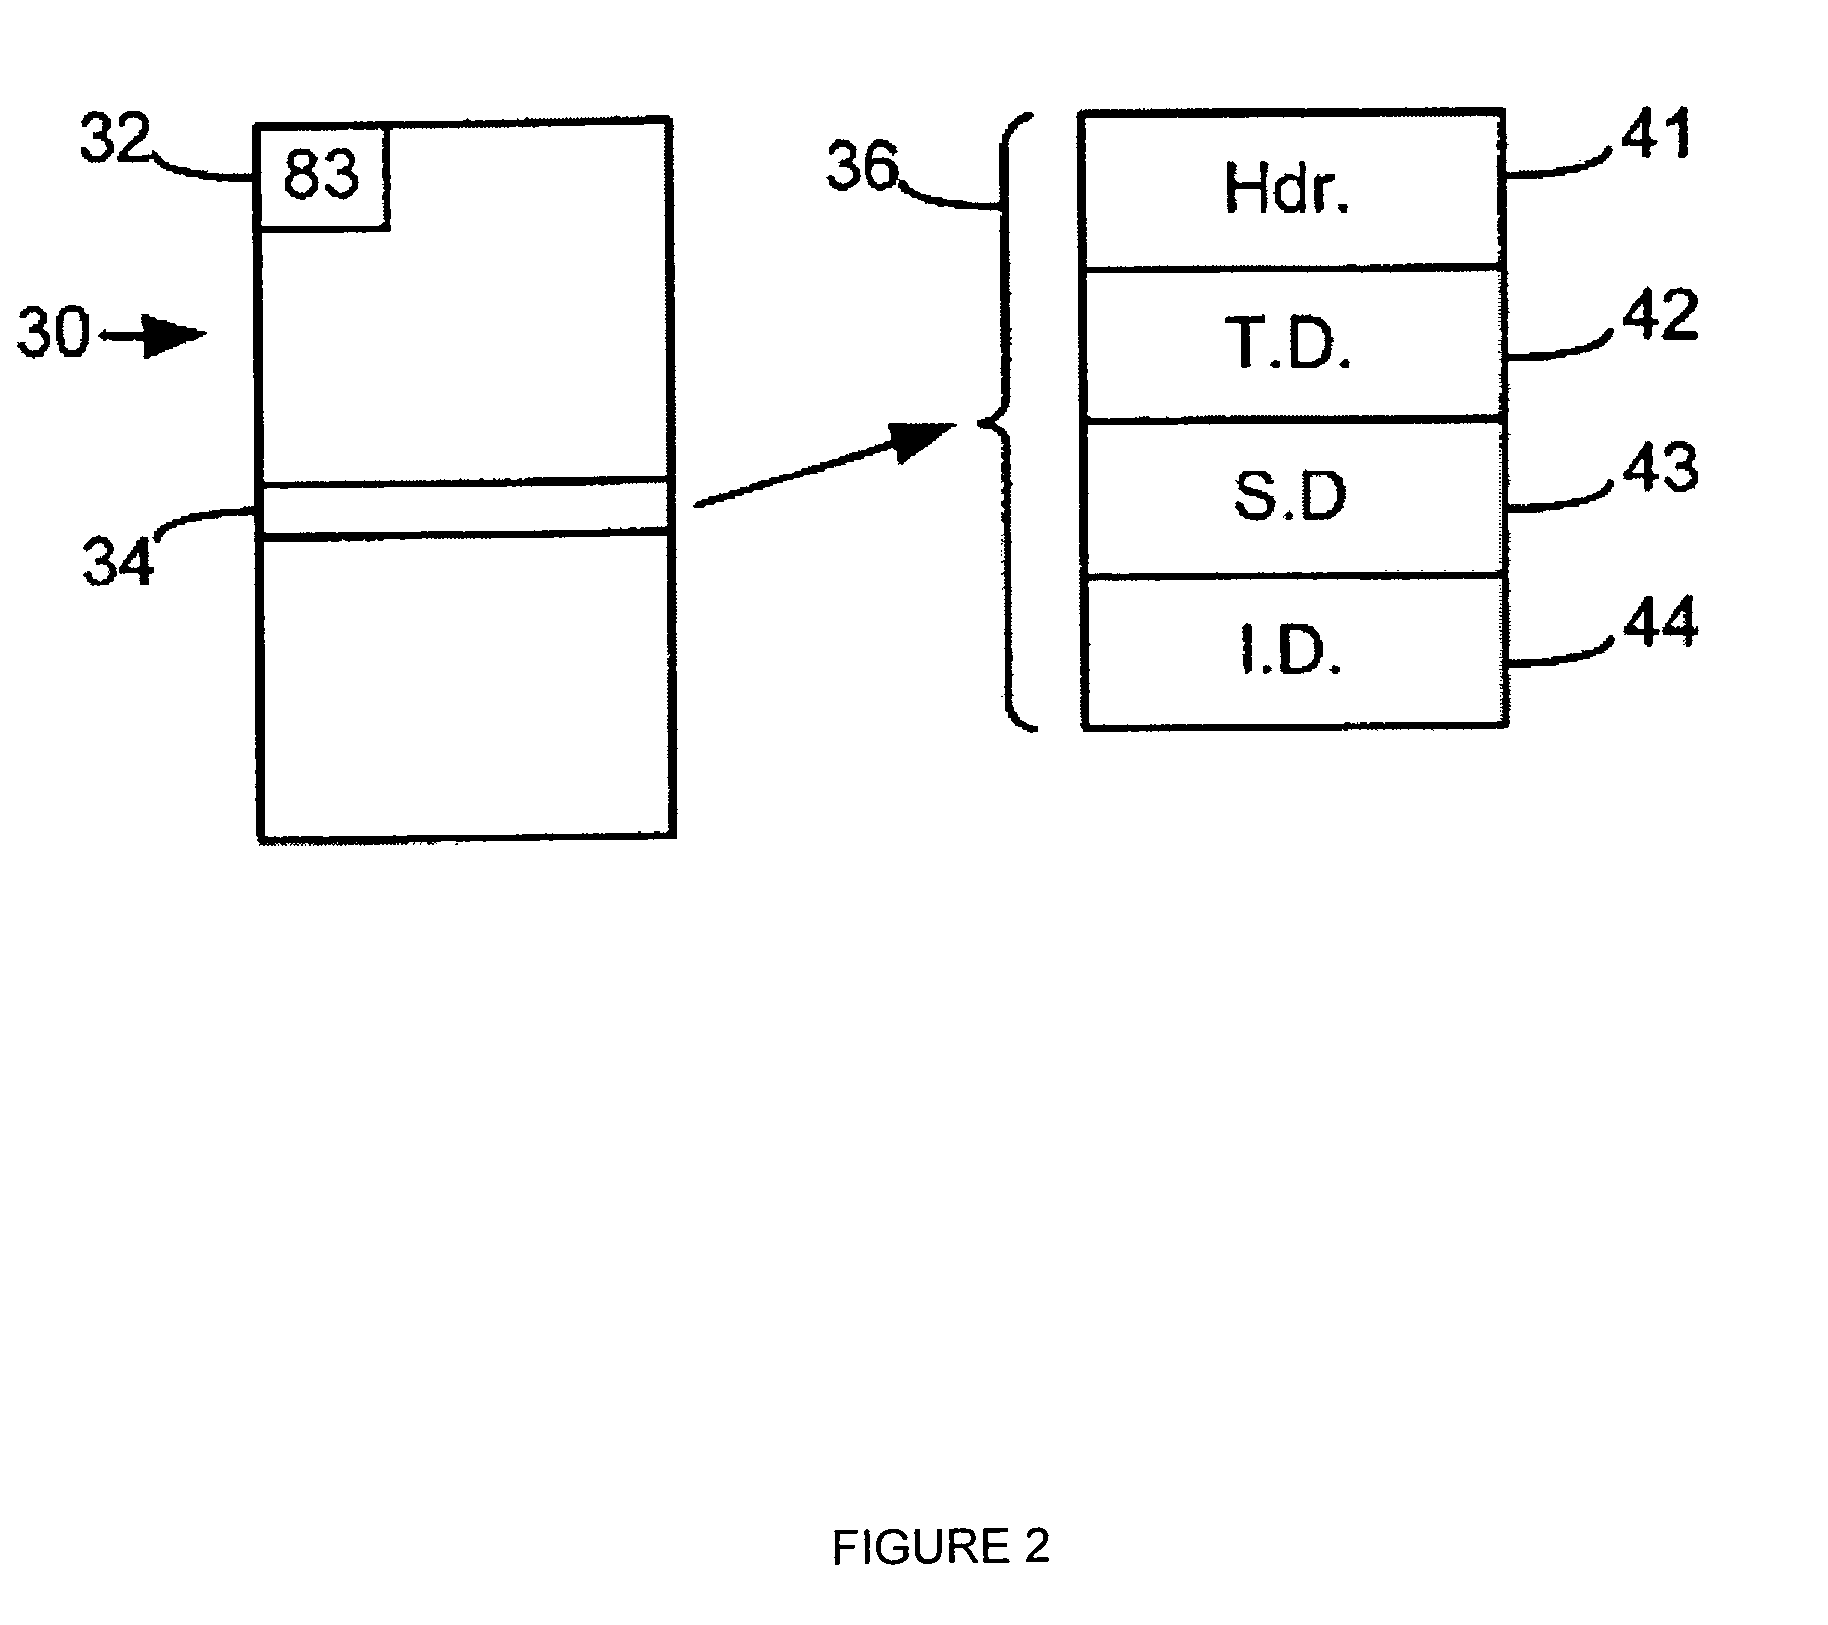 System and method for processing multiple concurrent extended copy commands to a single destination device